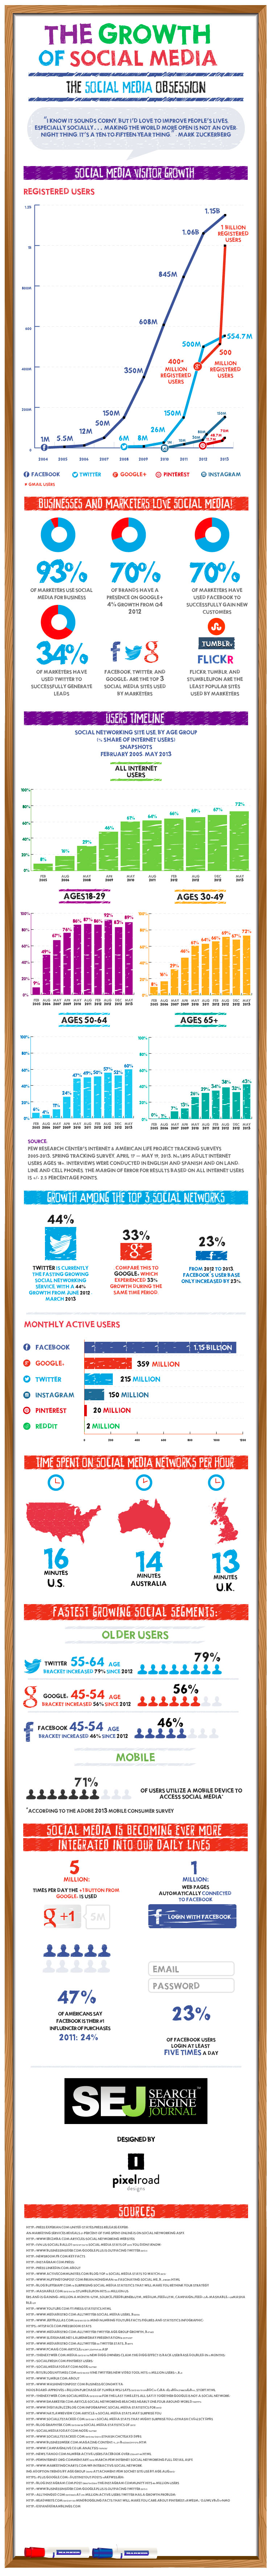 Growth of Social Media Infographic